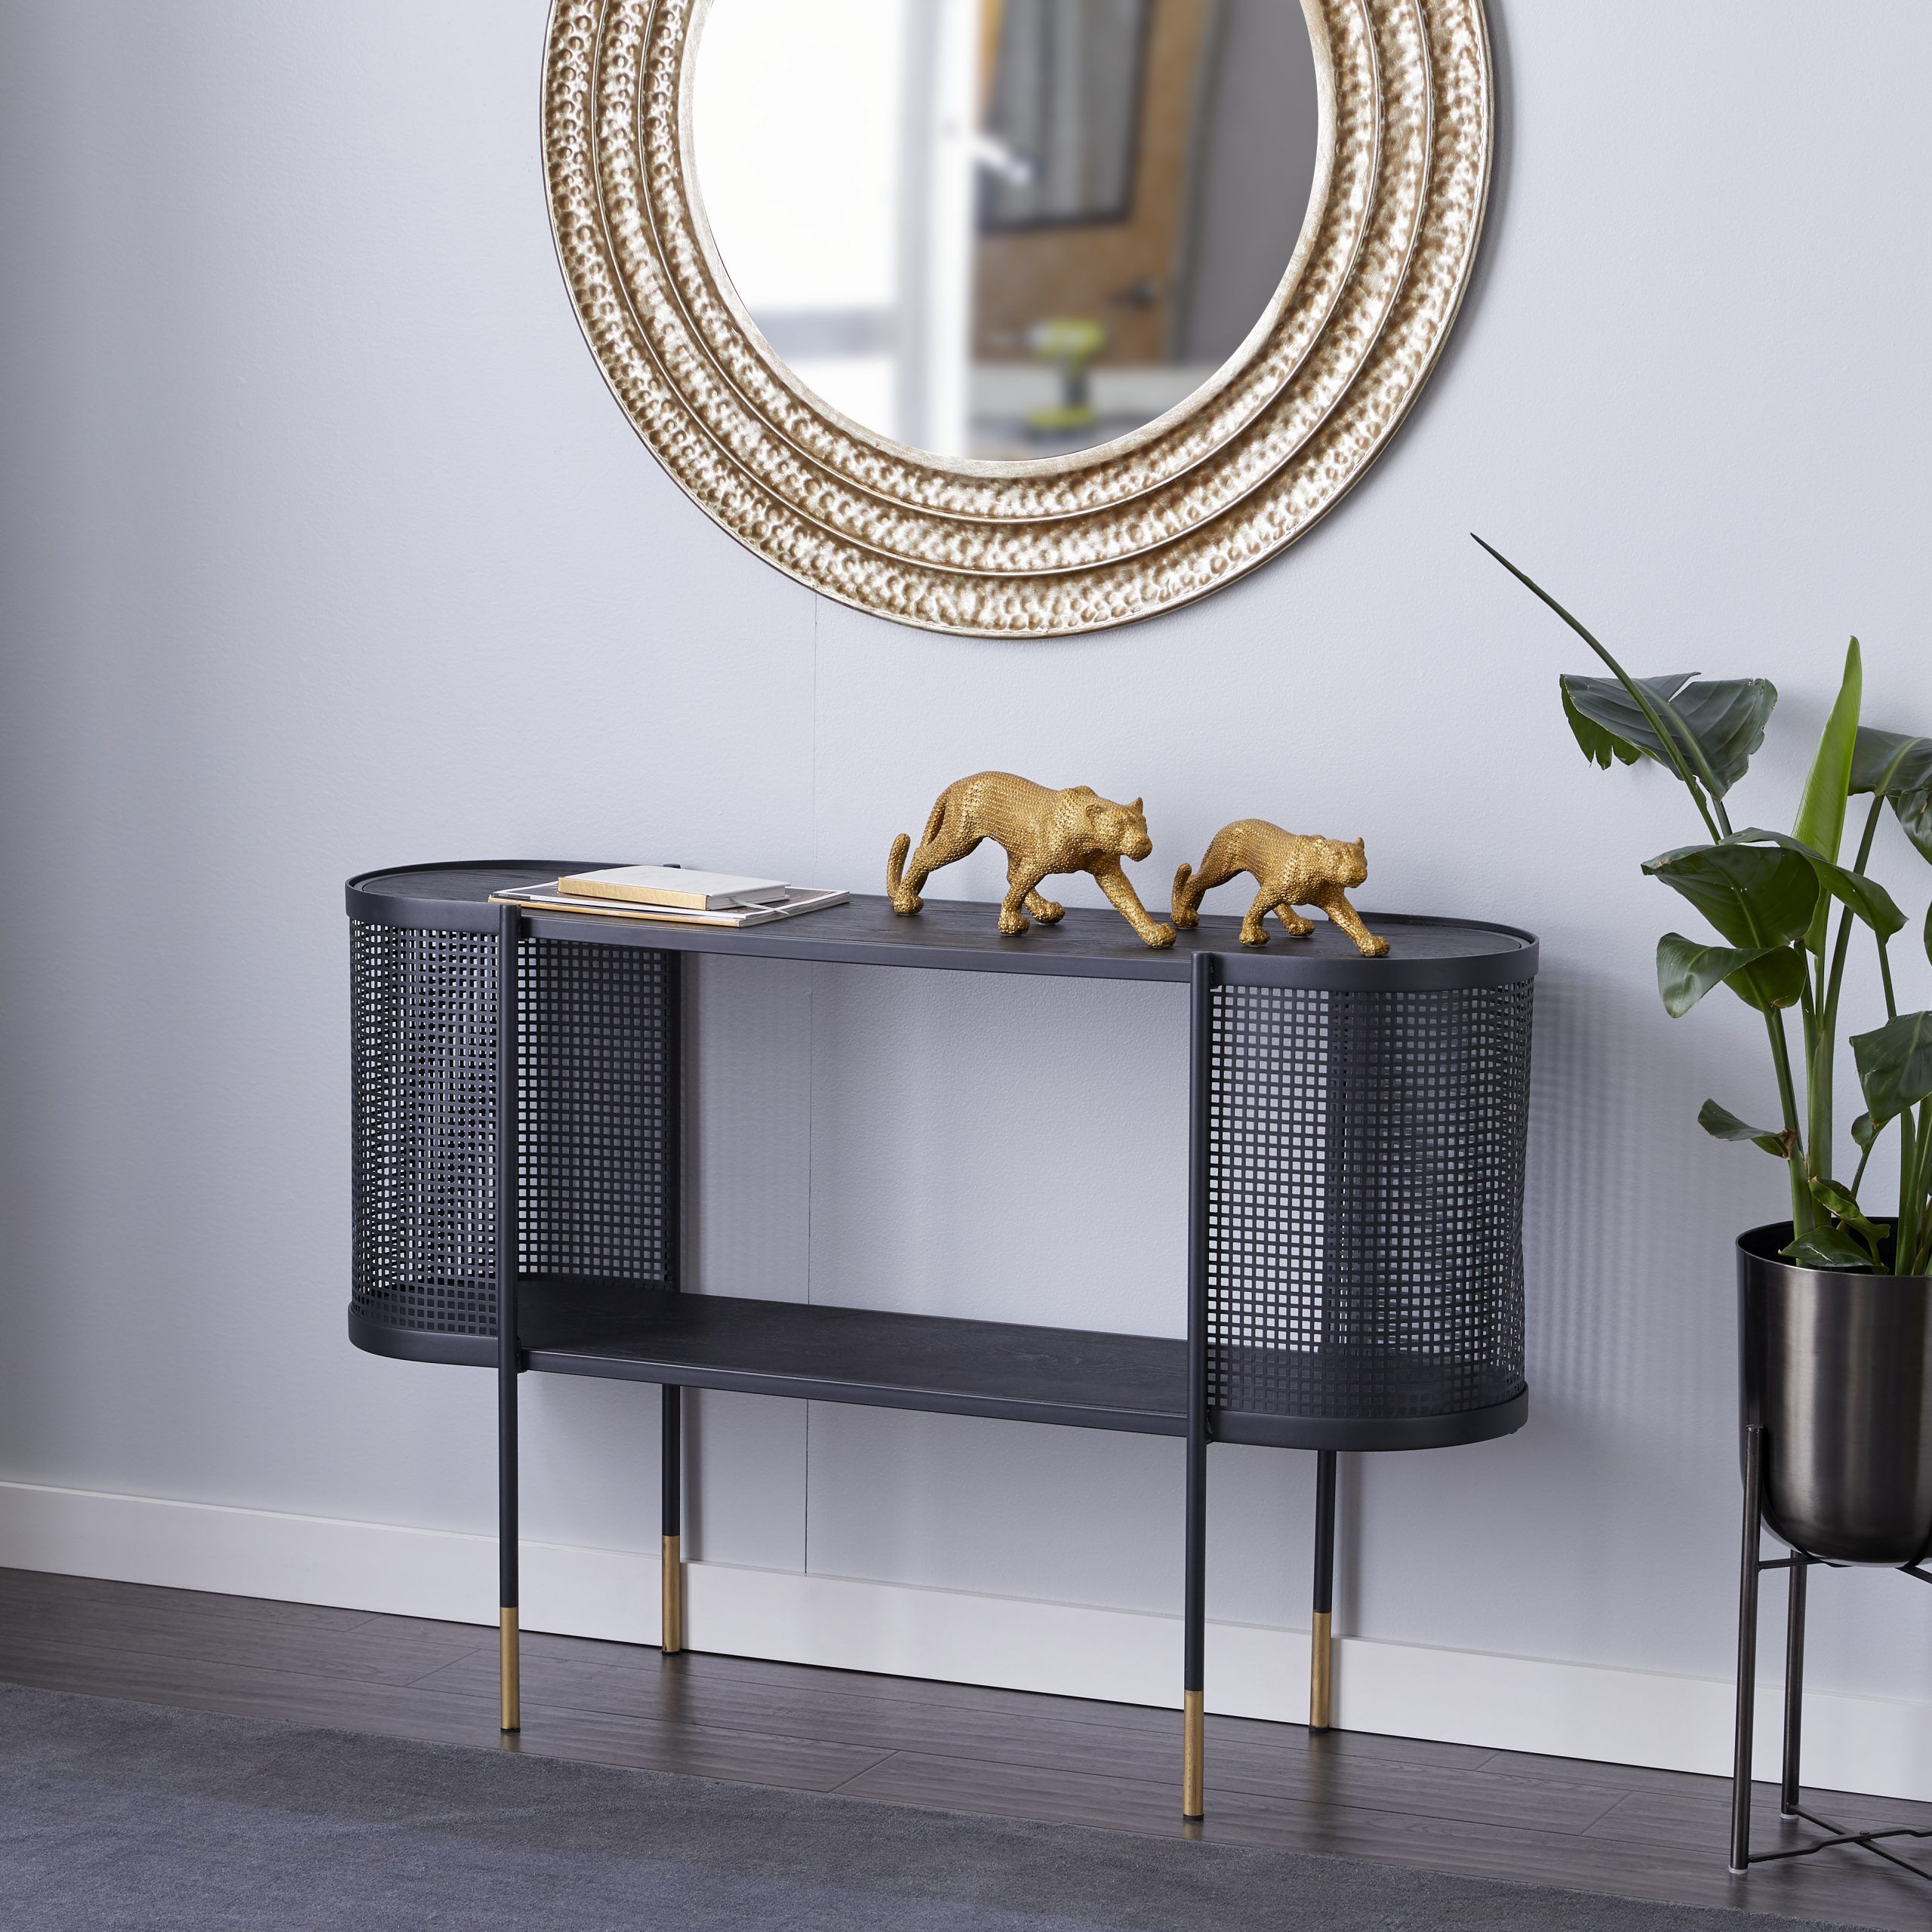 Decmode Oval Black Metal Wrapped Console Table With Open Storage Center Inside Black Metal And Marble Console Tables (View 7 of 20)